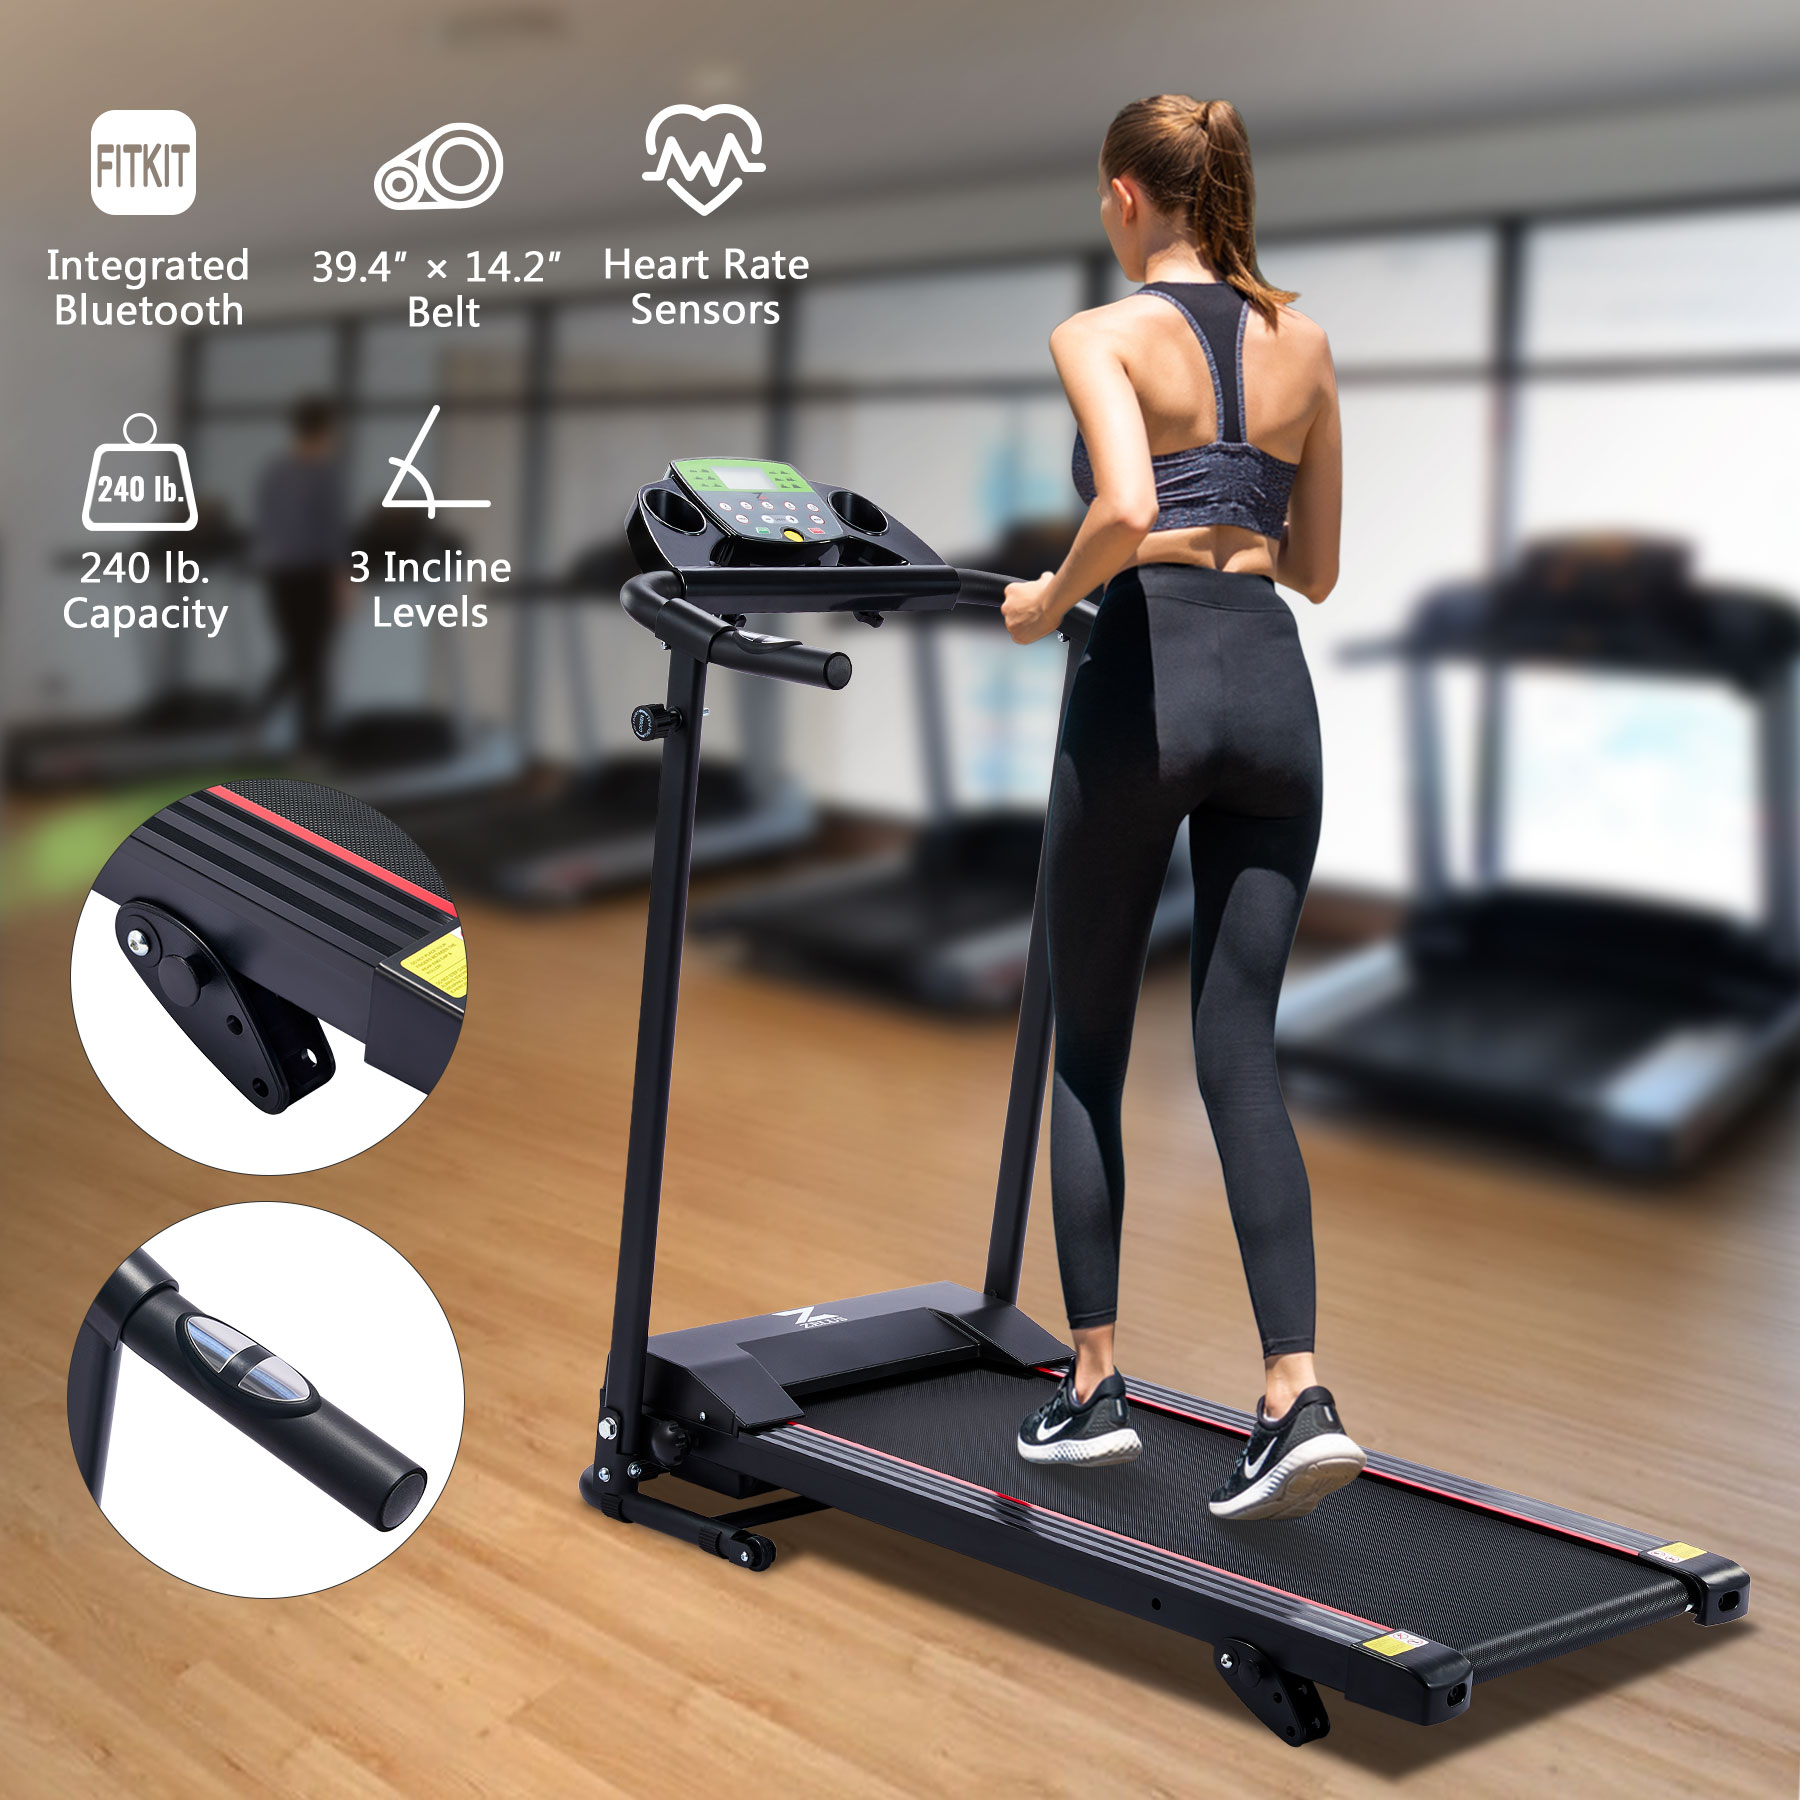 Folding Home Treadmill with Incline Heart Rate Monitor 750W Motor 6.2mph Max - image 1 of 8